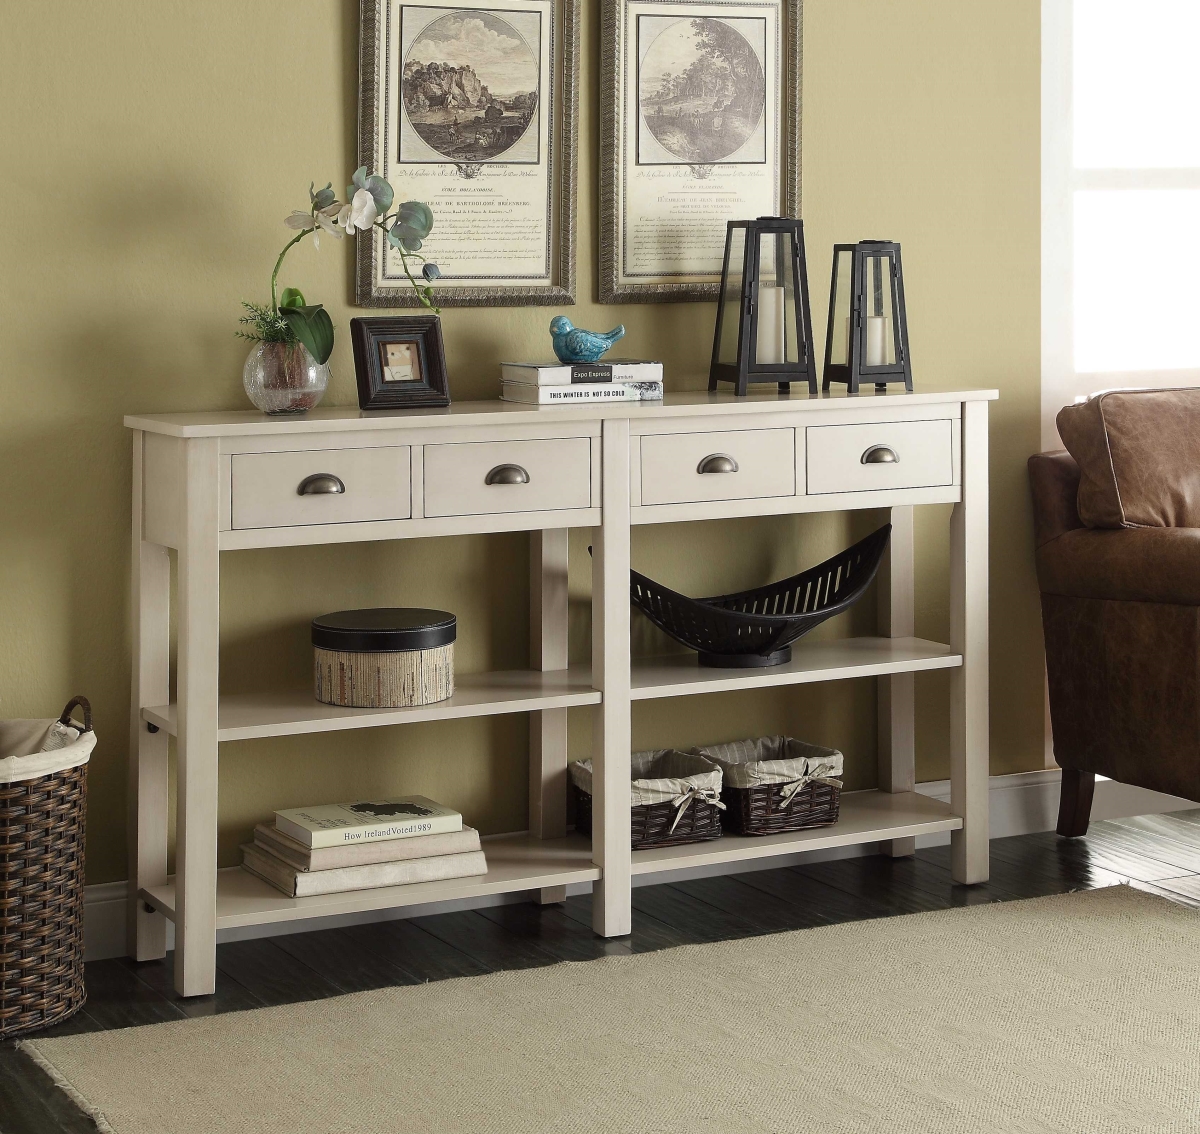 Home Roots Furniture 286113 35 X 72 X 12 In. Wood & Mdf Console Table - Cream